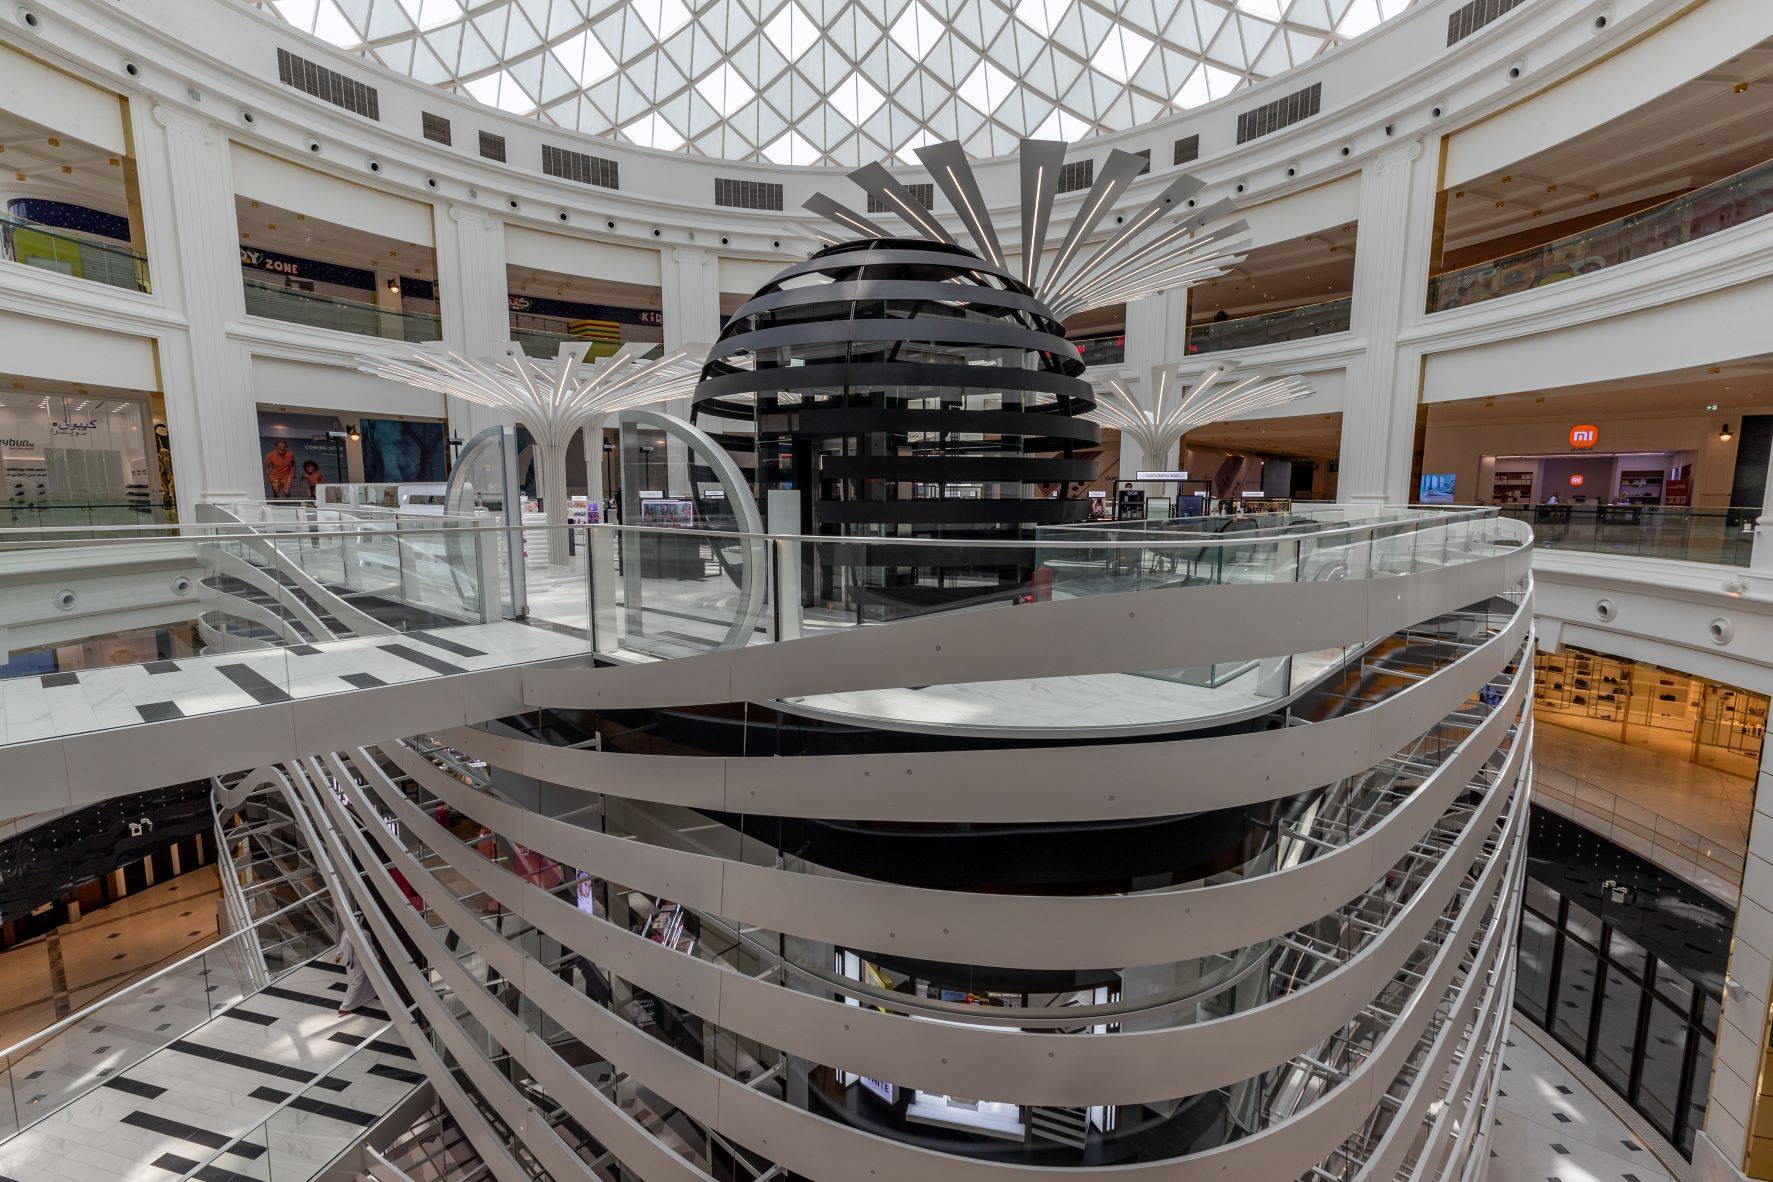 Louis Vuitton Vendome Mall, Lusail Qatar - g4 group Architecture and  engineering Barcelona